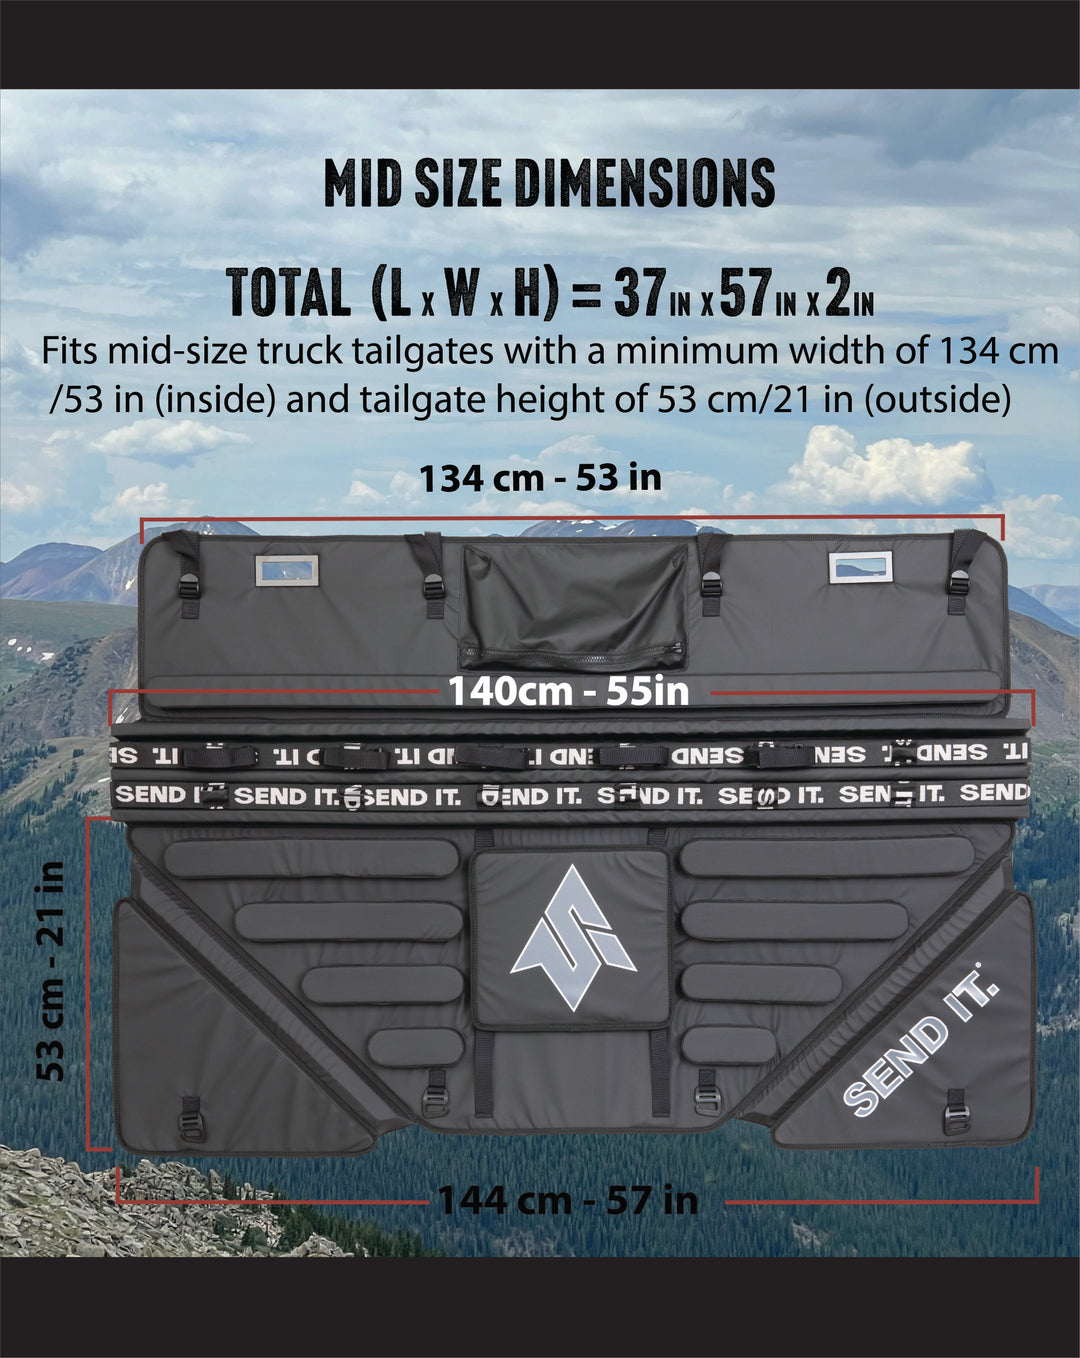 Image Showing the send it roller tailgate pad with all dimensions called out. The tailgate pad is 53 inches wide on the inner truck bed panel, 55in on the top of the tailgate pad, and 57 inches wide for the outer panel of the tailgate.